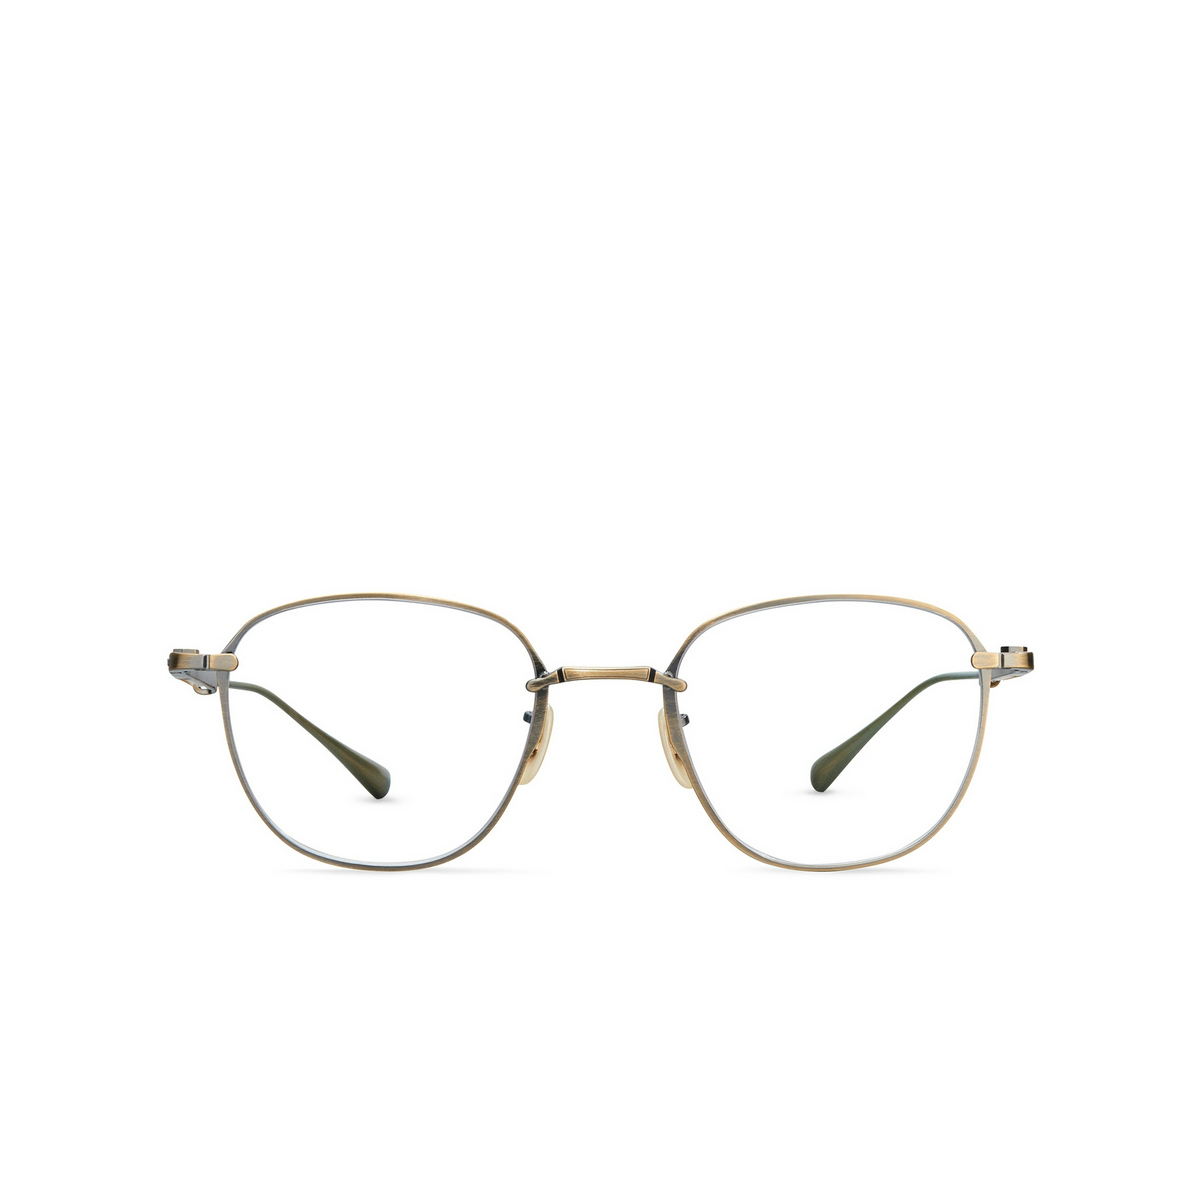 Mr. Leight GRIFFITH CL Eyeglasses ATSG-SMT Antique Silver Gold-Summit - front view